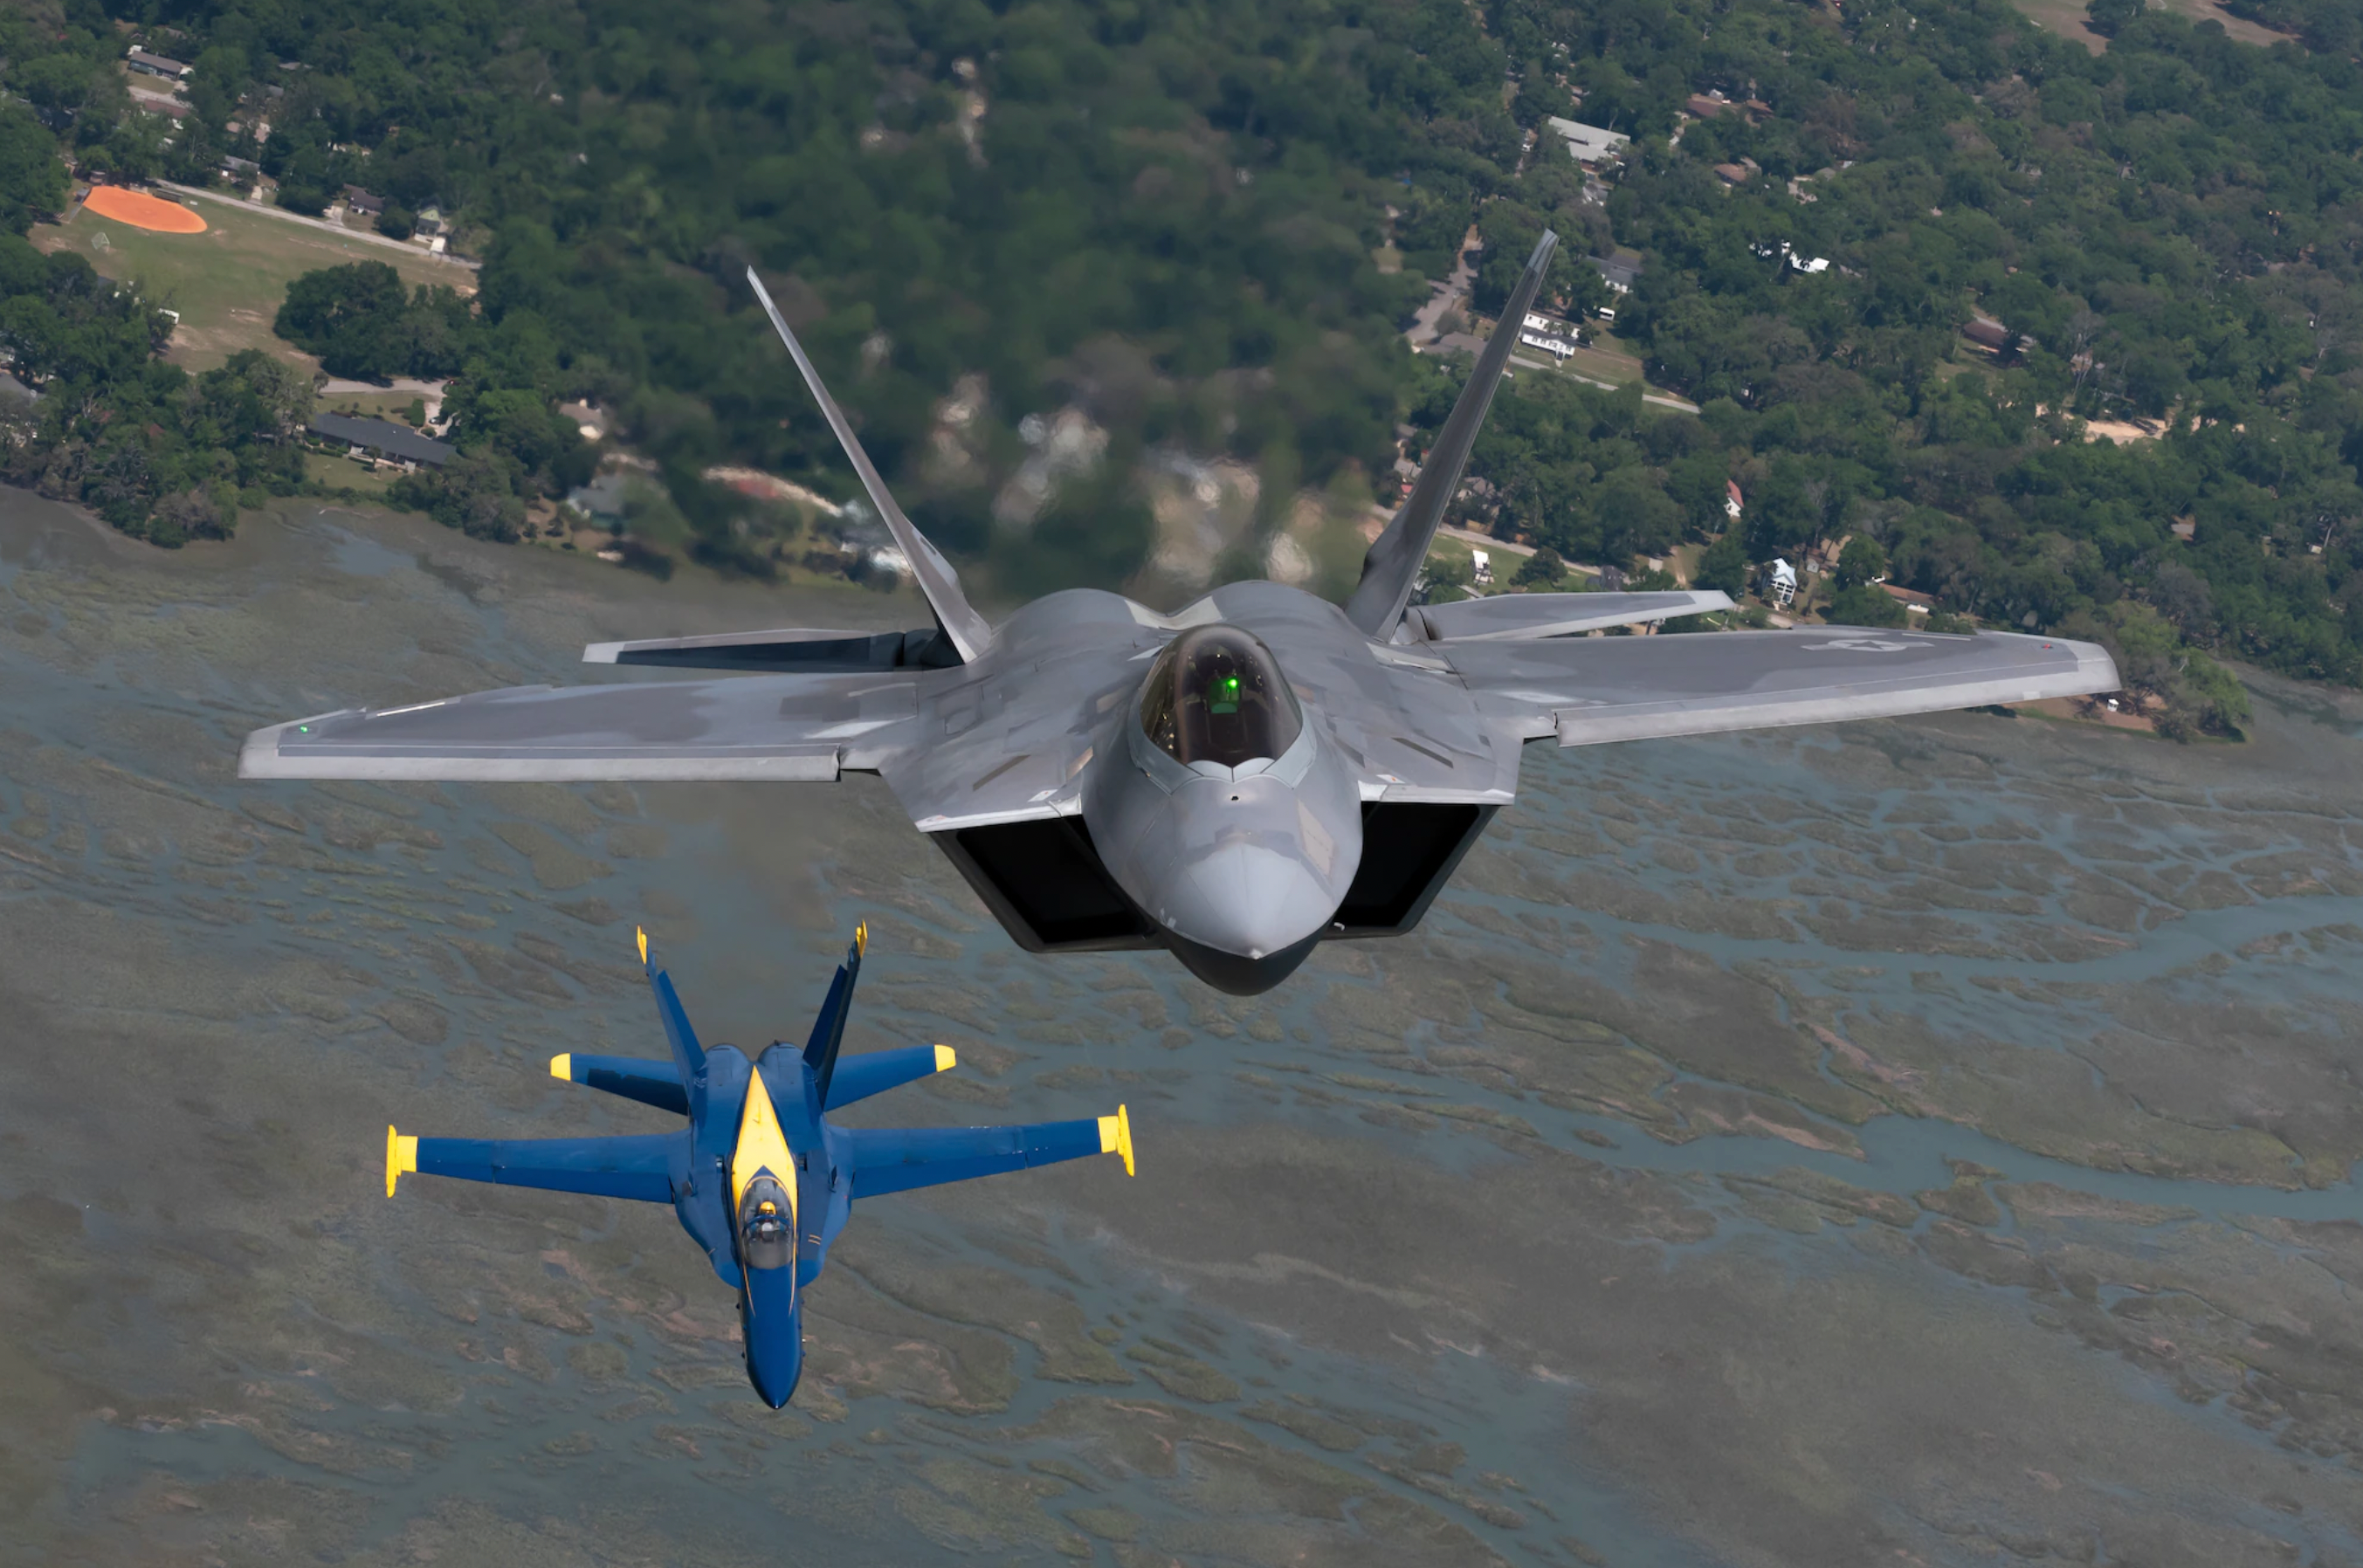 The king is dead: Why would America want to retire the F-22?